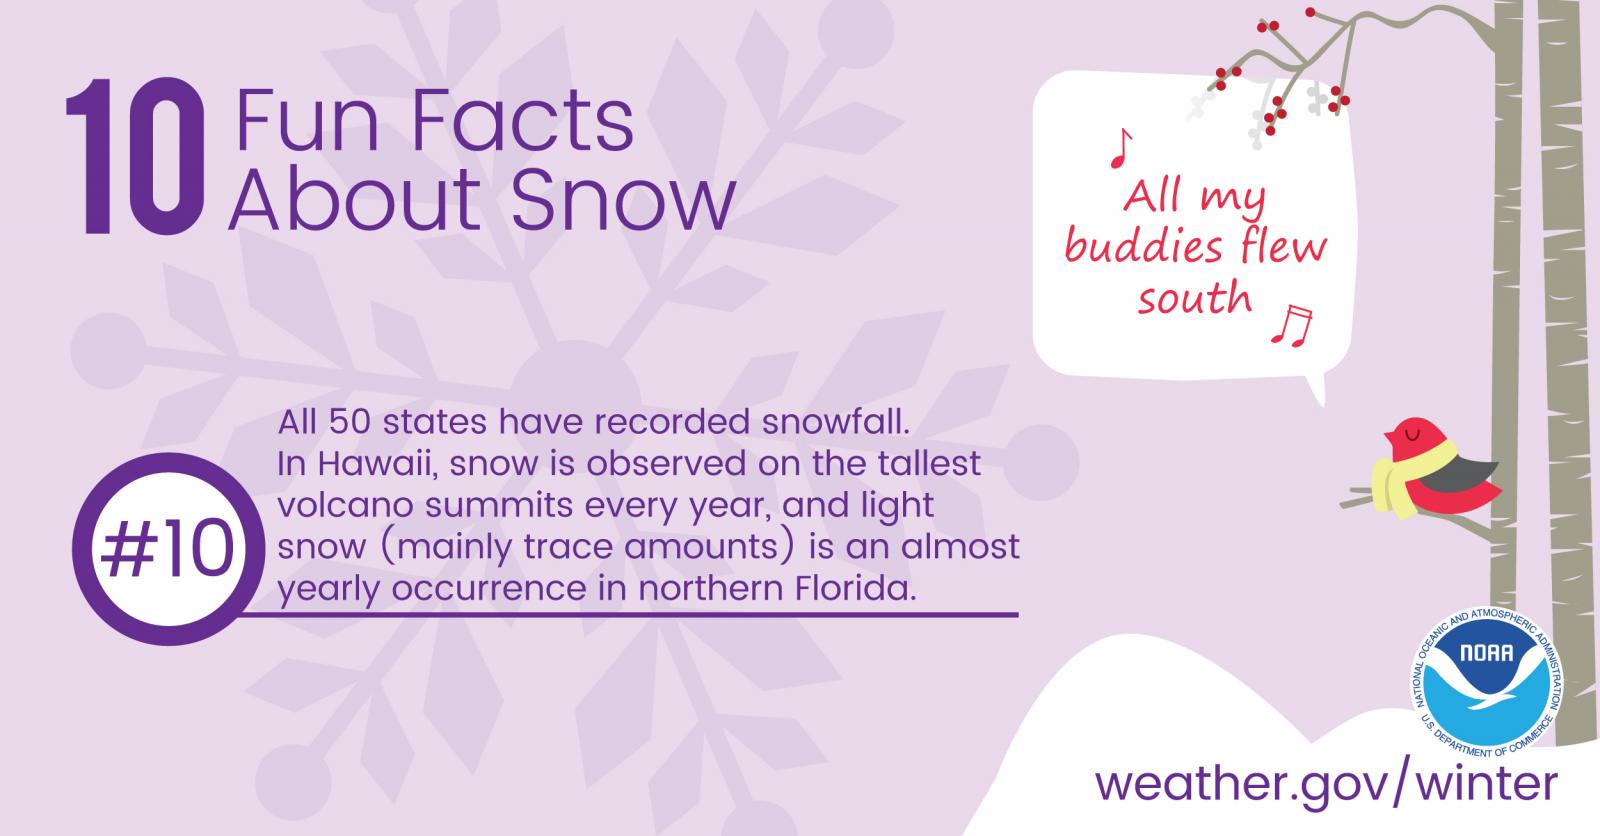 10 Fun Facts About Snow: #10. All 50 states have recorded snowfall. In Hawaii, snow is observed on the tallest volcano summits every year, and light snow (mainly trace amounts) is an almost yearly occurrence in northern Florida.